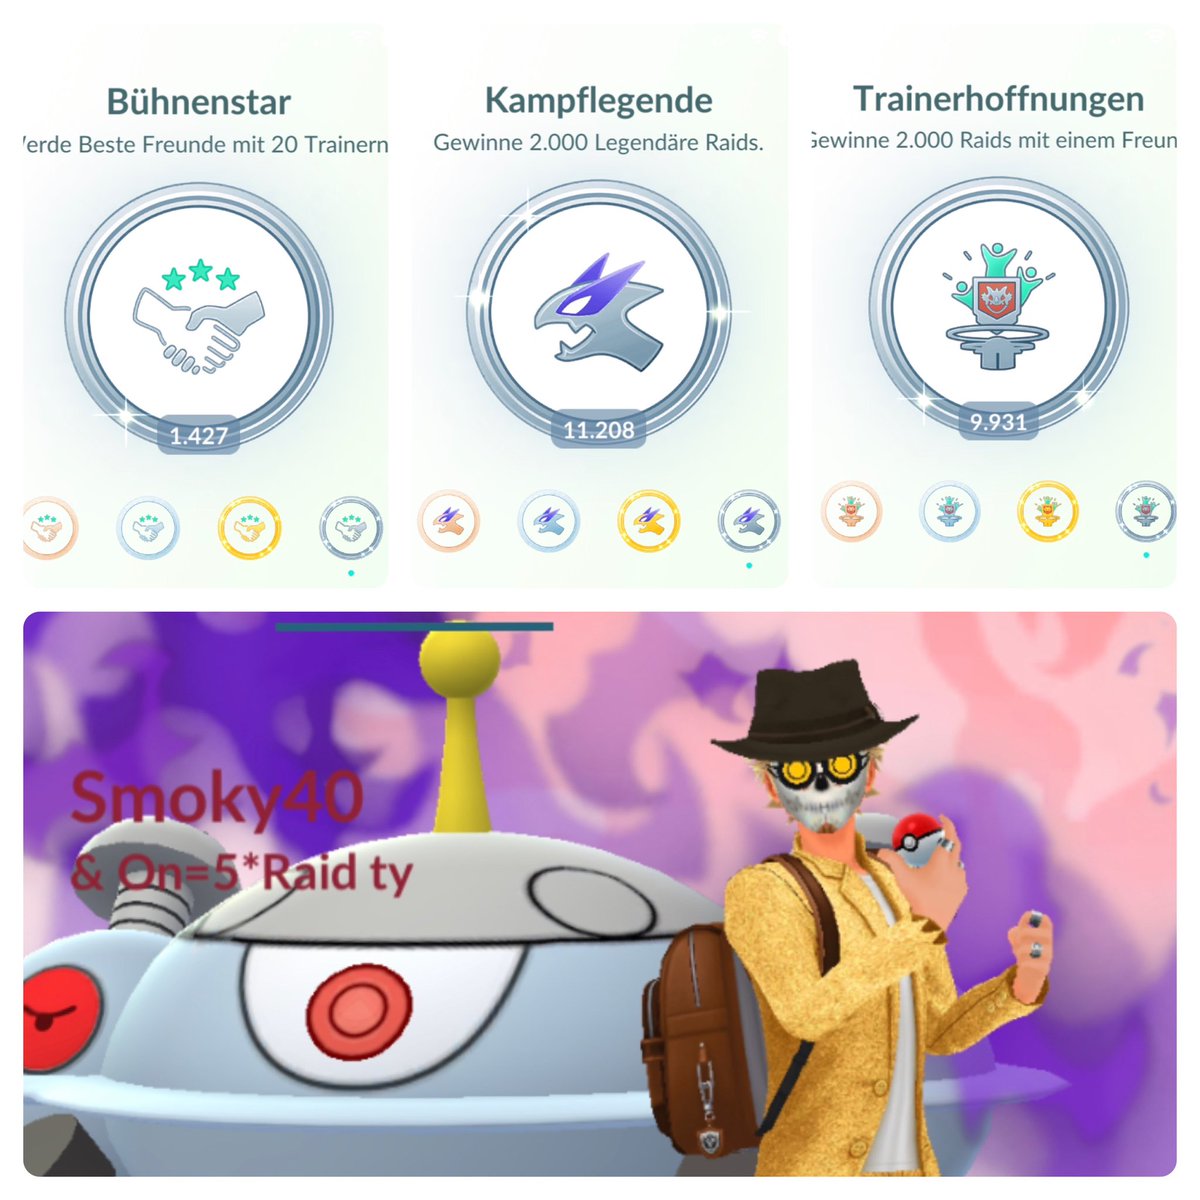 Hii!!, Friends.

am looking for new friends!!!🫶🏻

wanted:
- friends for some raids
- active gifts opens
- maybe a good daily trade partner

schreib mir 🤝🏻🇩🇪

9309 3445 2112

#PokemonGO #PokemonGOfriend #PokemonGOfriendscode #PokemonGOCode